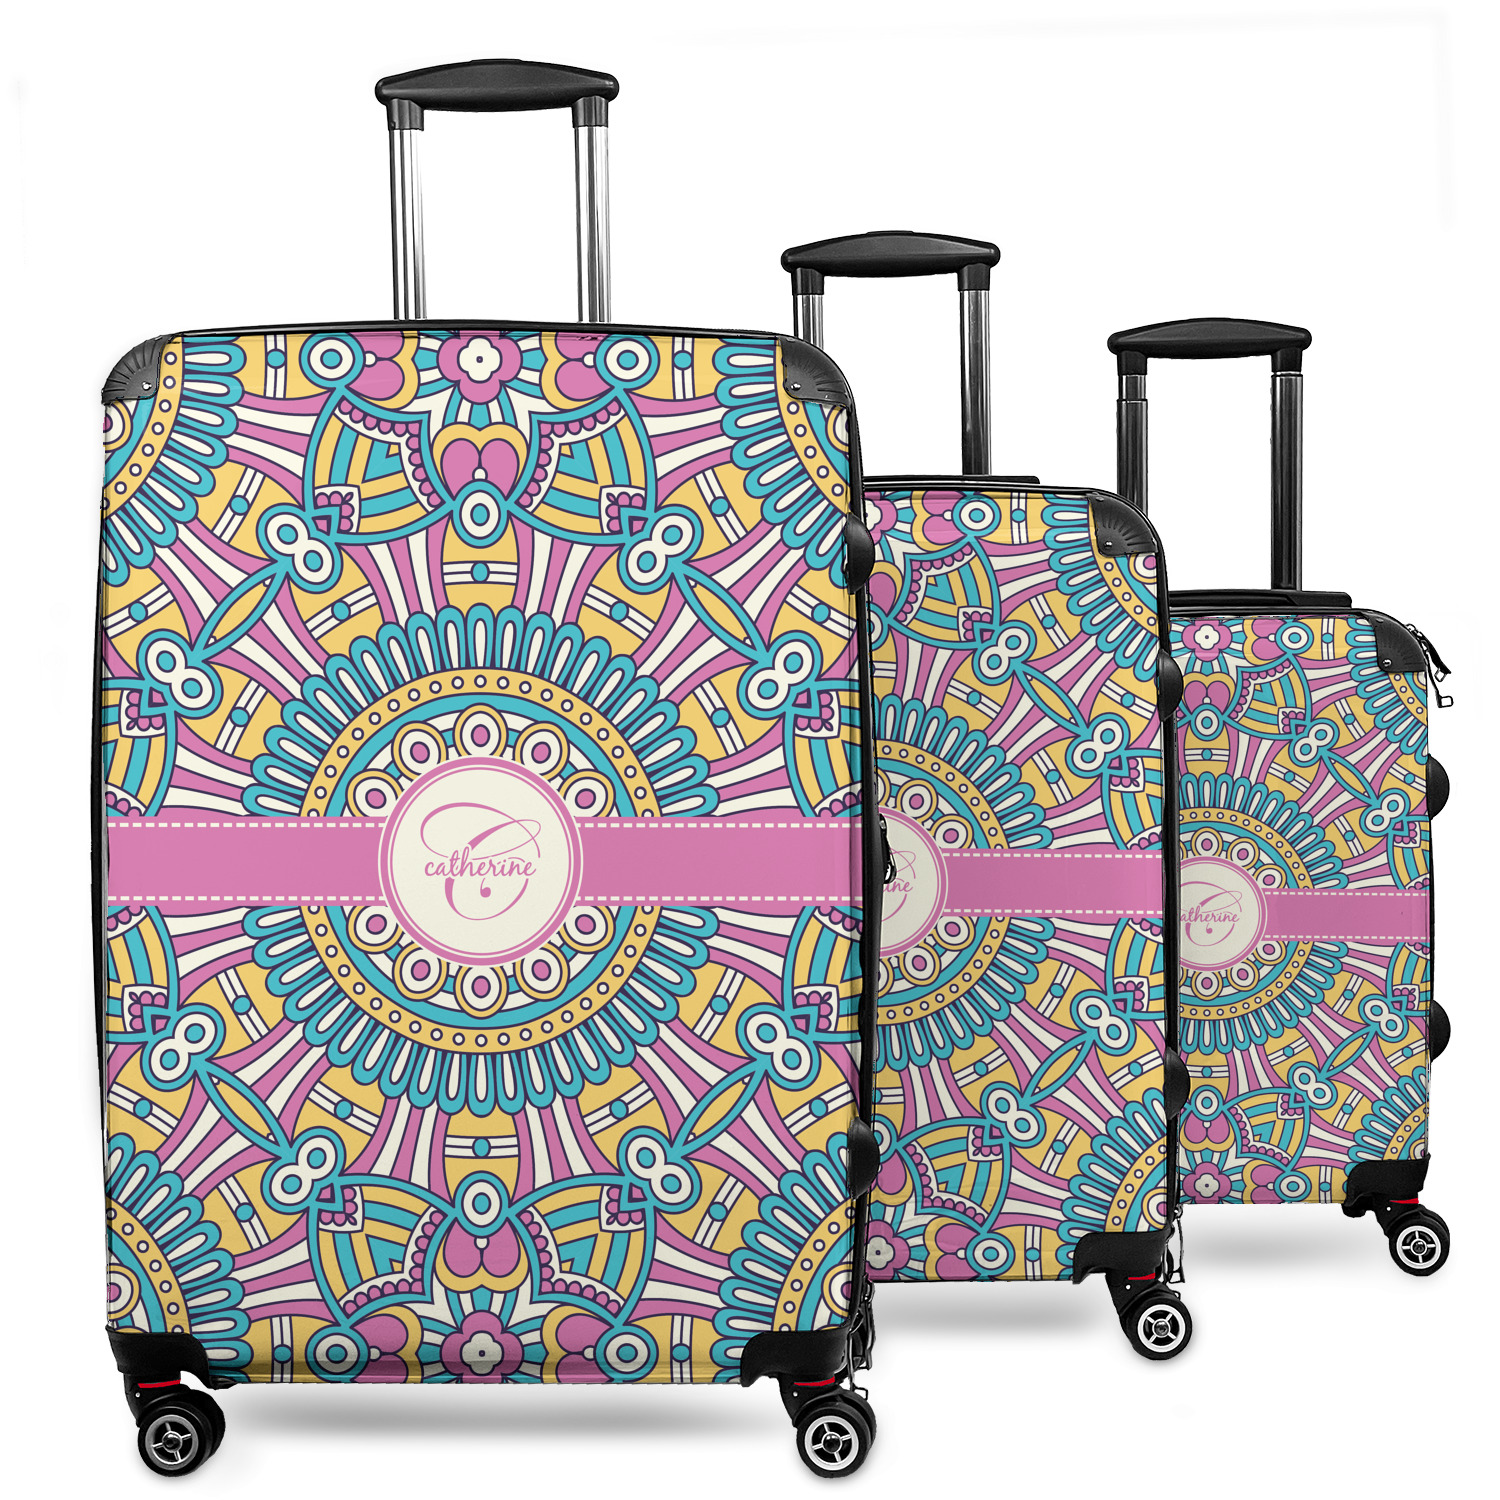 3 Piece Luggage Sets Suitcase/Trunk /Check-in Luggage /Carry-on